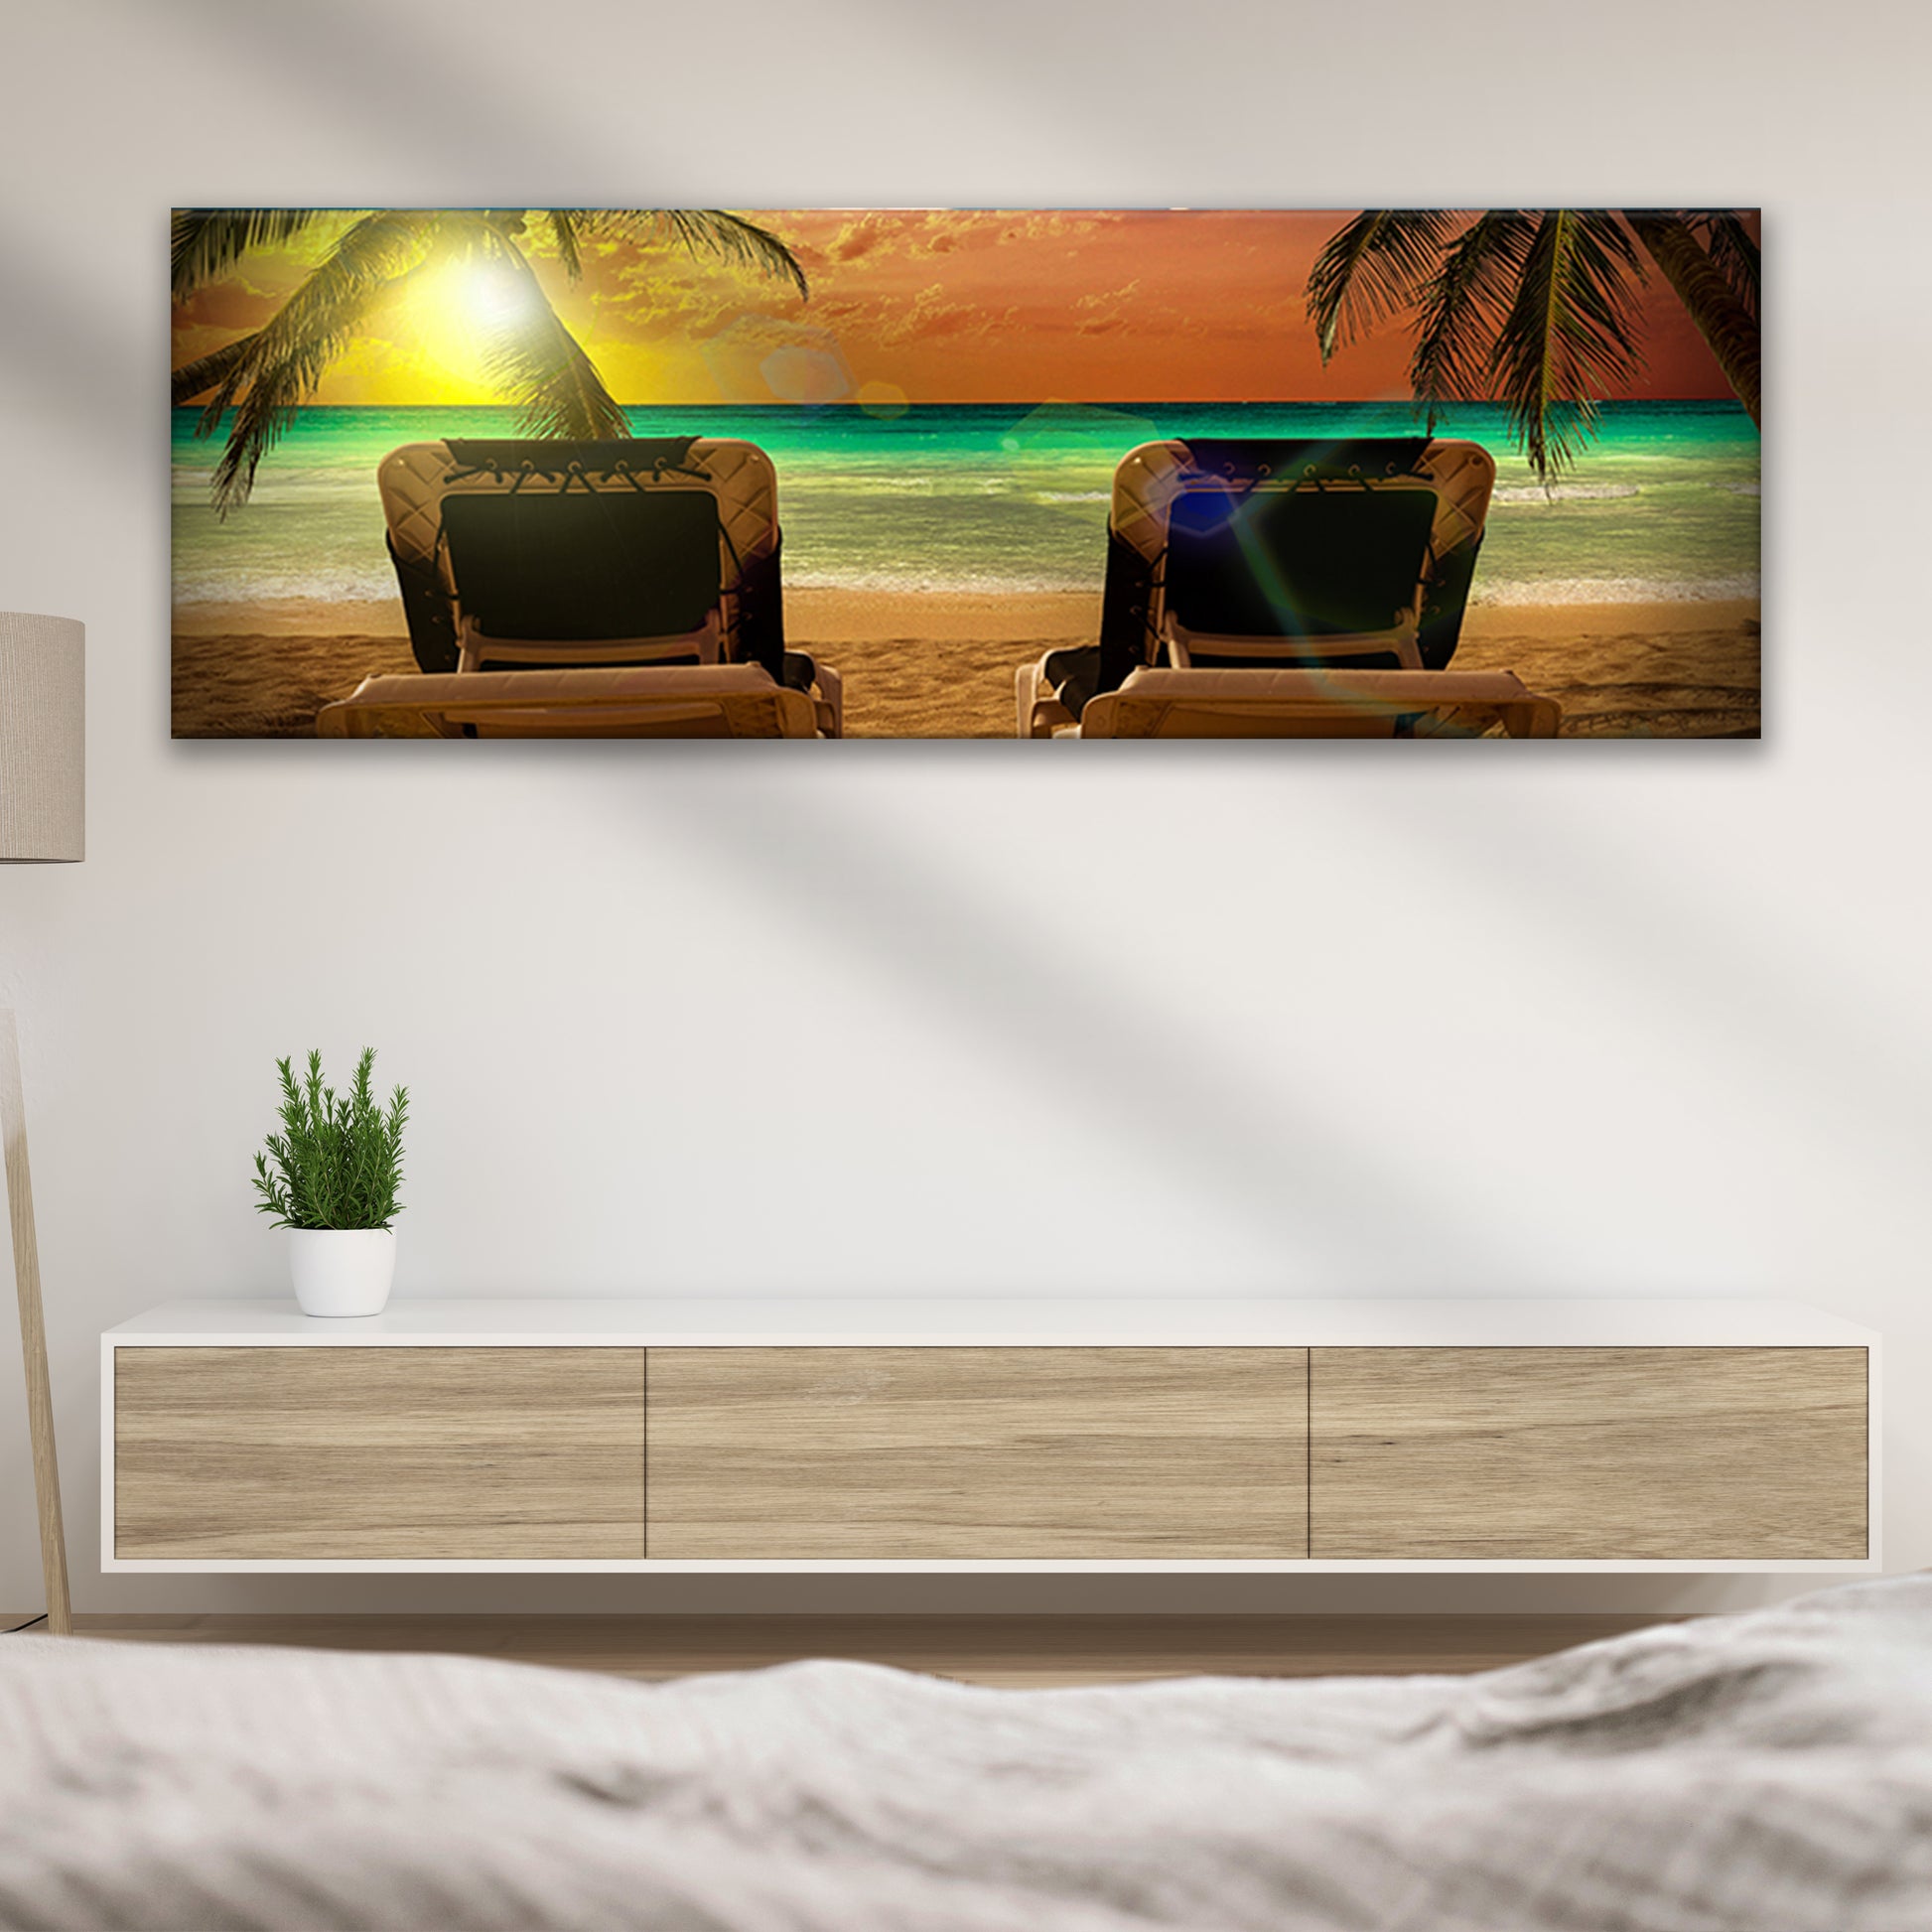 Tropical Beach Chairs By Sunset Canvas Wall Art - Image by Tailored Canvases